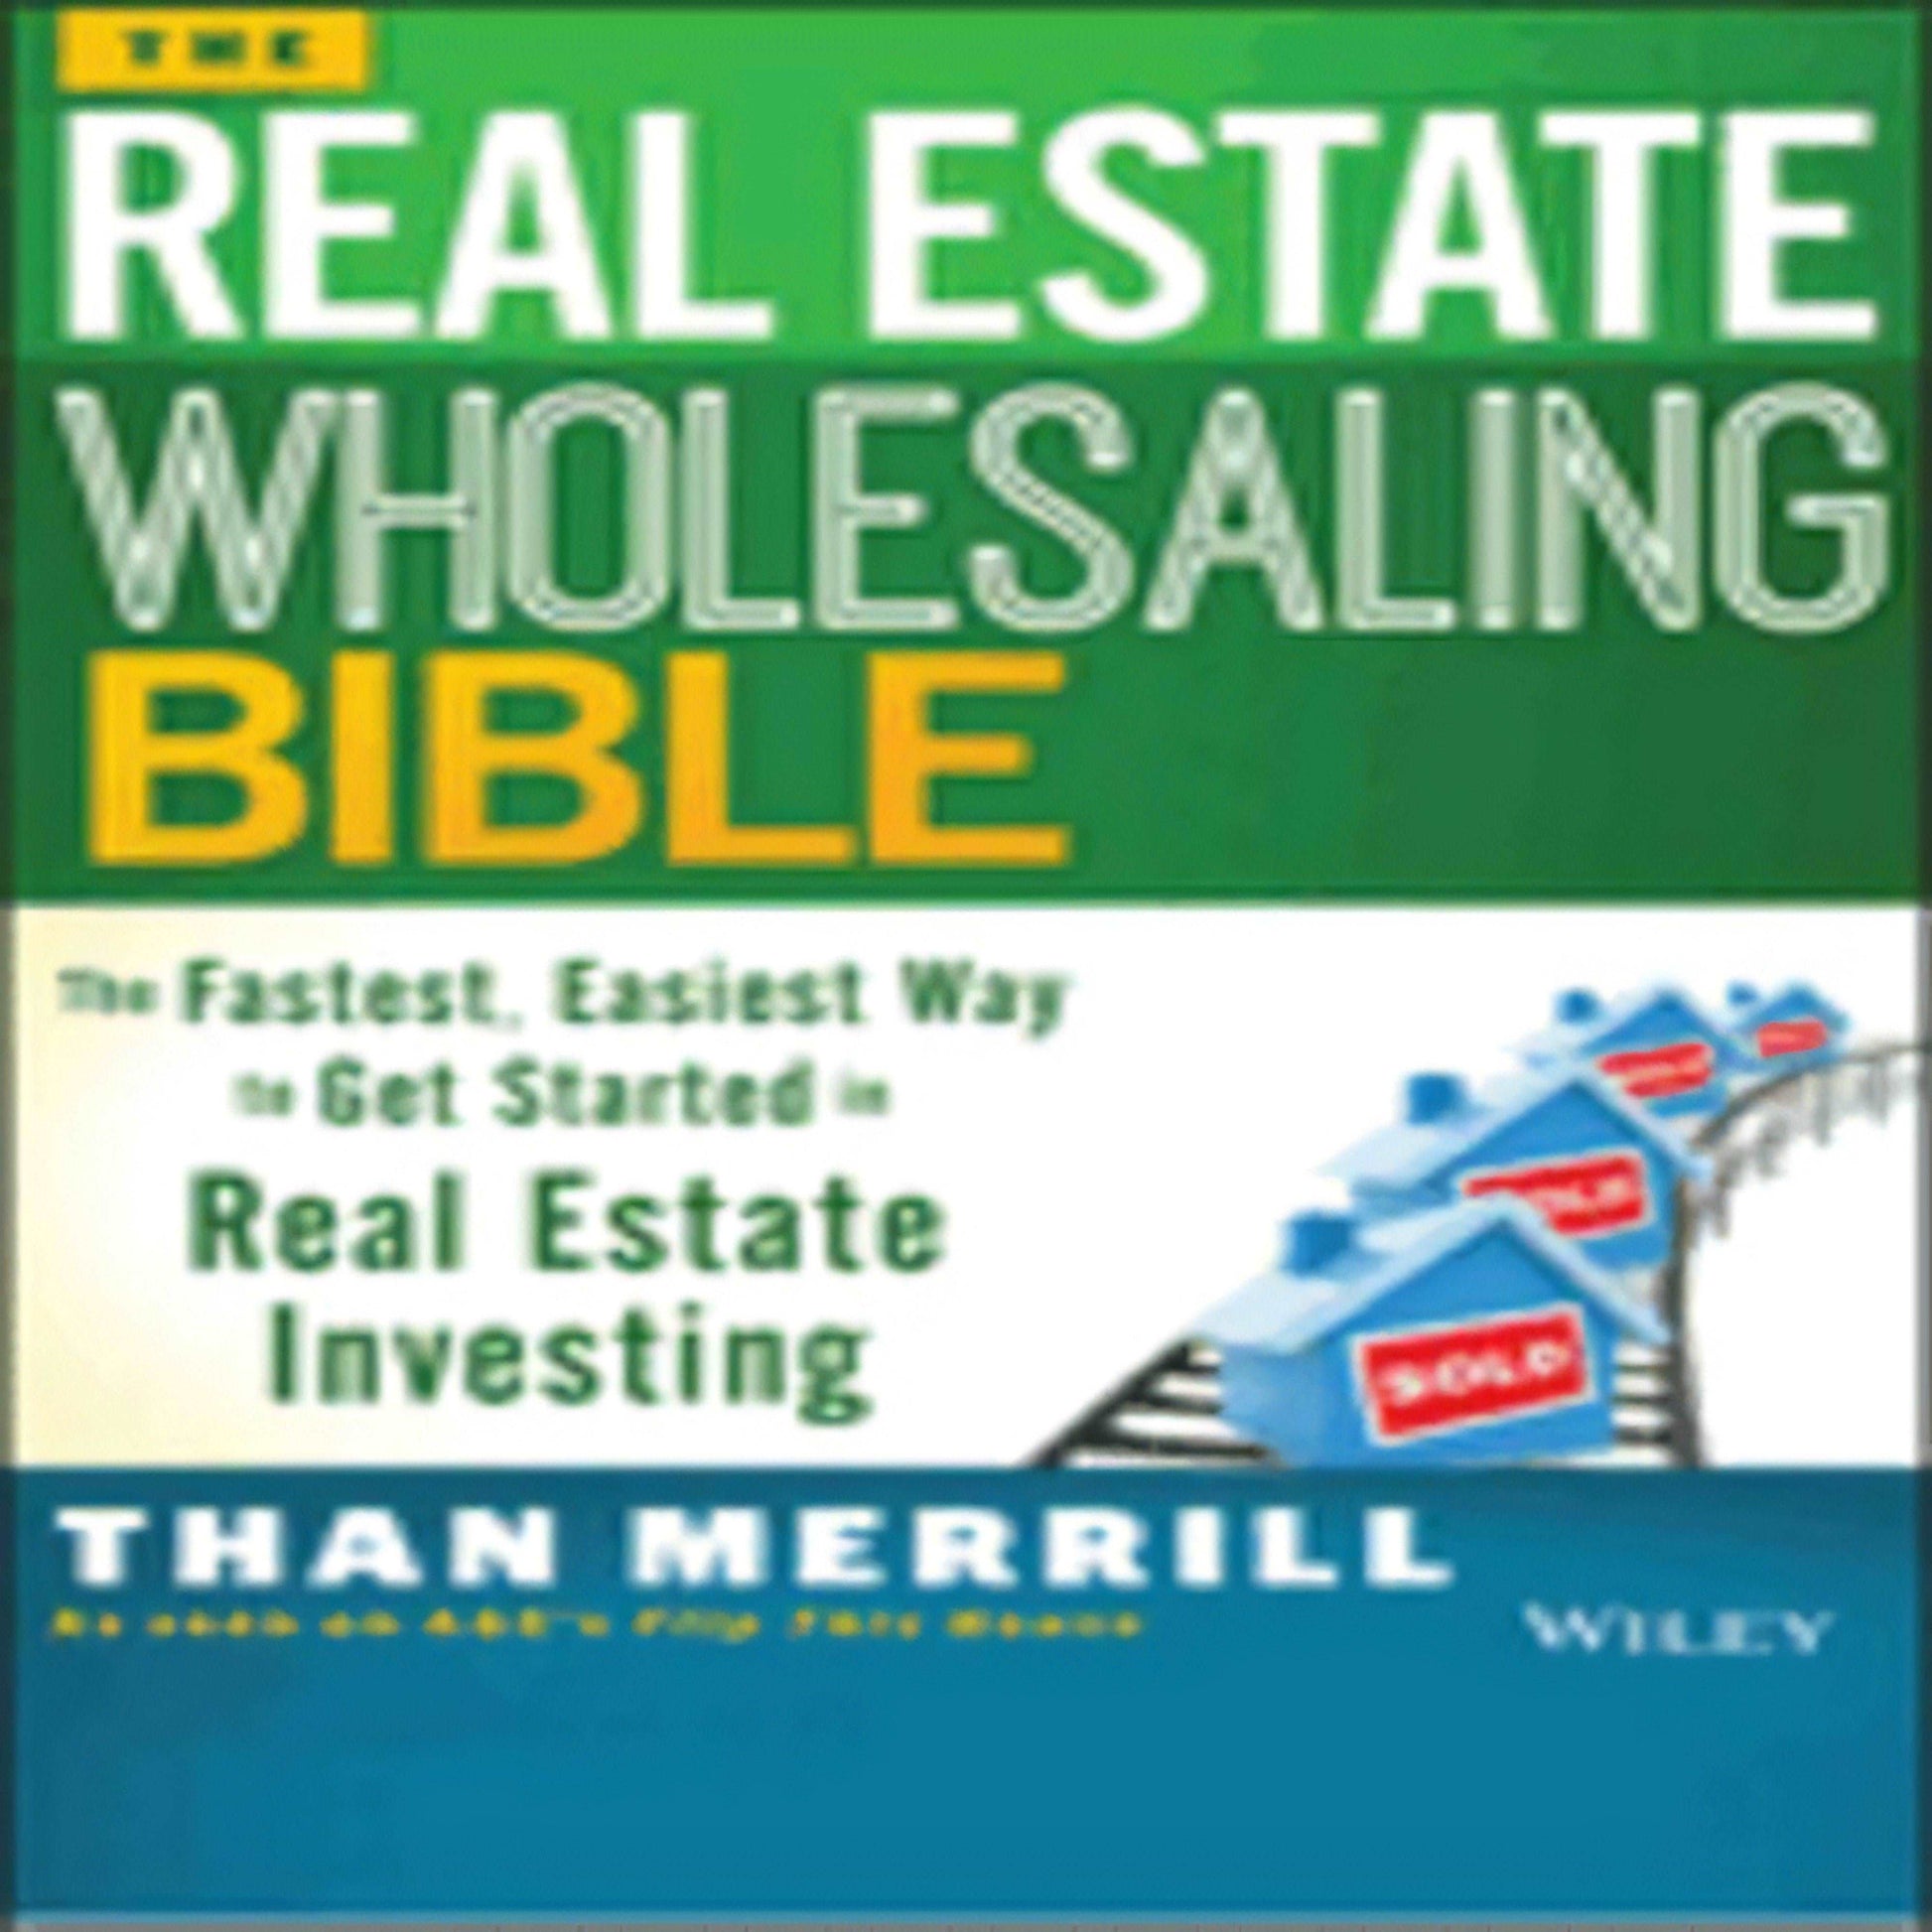 The Real Estate Wholesaling Bible: The Fastest, Easiest Way to Get Started in Real Estate Investing (1ST ed.)80-121222-1118807529DPGBOOKSTORE.COM. Today's Bestsellers.